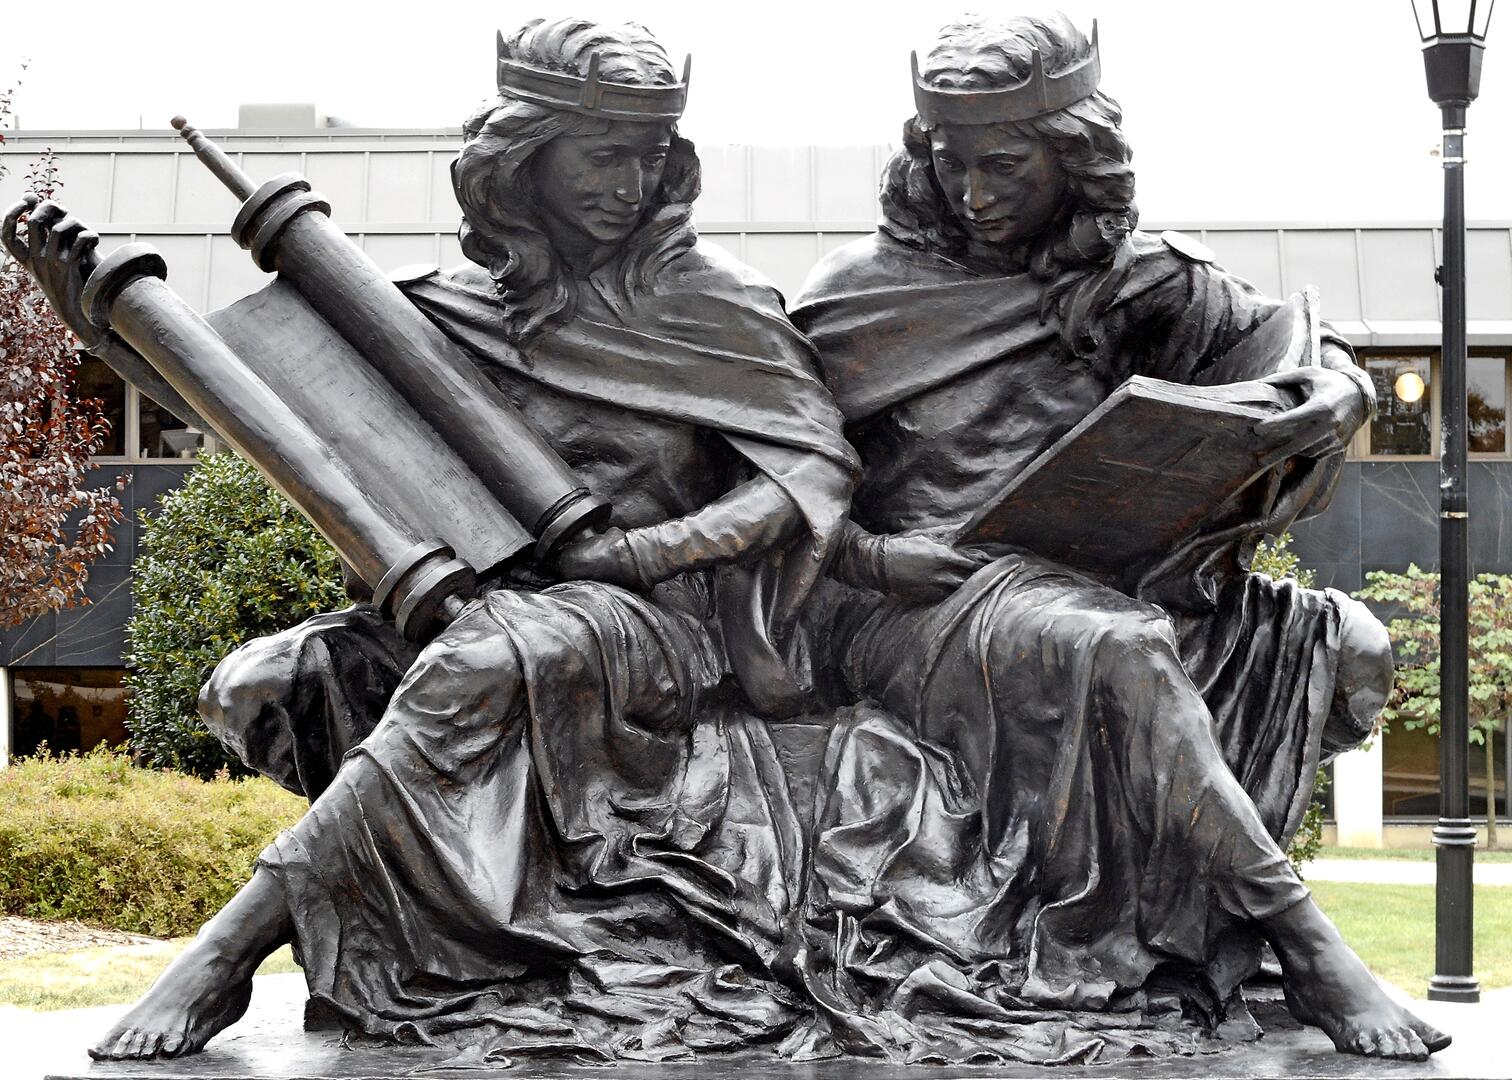 The "Synagoga and Ecclesia in Our Time" sculpture by Joshua Koffman is seen on the campus of St. Joseph's University in Philadelphia. The sculpture shows Synagoga (Synagogue) and Ecclesia (Church) studying their sacred texts together. Pope Francis prayed at and blessed the sculpture during his 2015 visit. (CNS photo/courtesy St. Joseph's University)